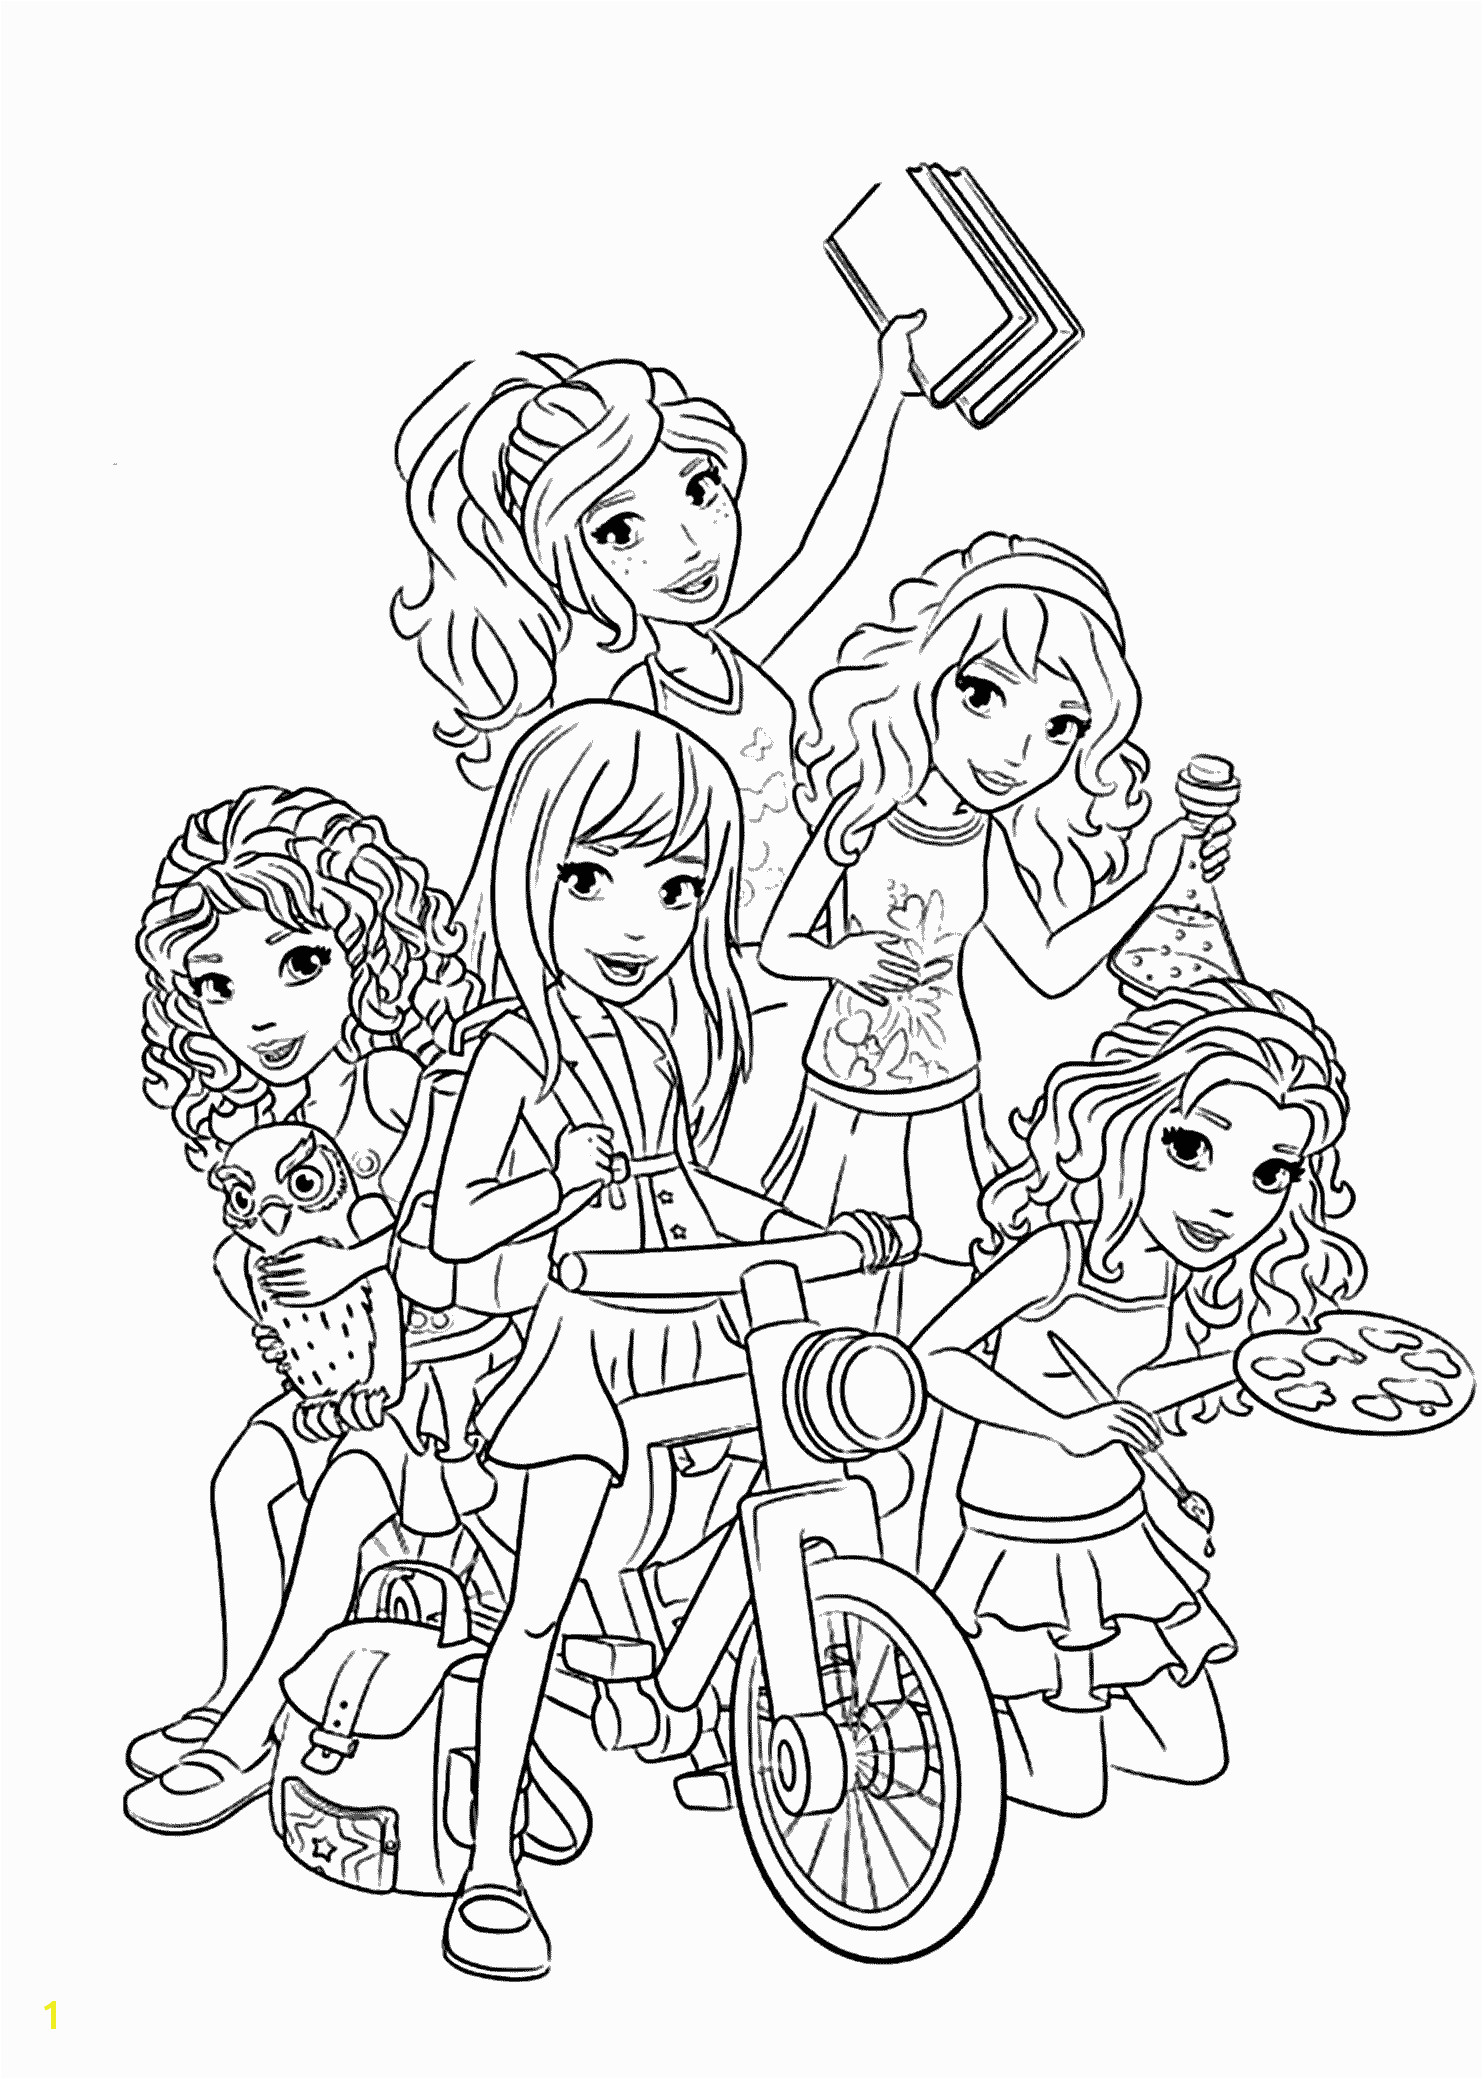 Coloring Pages About Friendship Lego Friends All Coloring Page for Kids Printable Free Lego